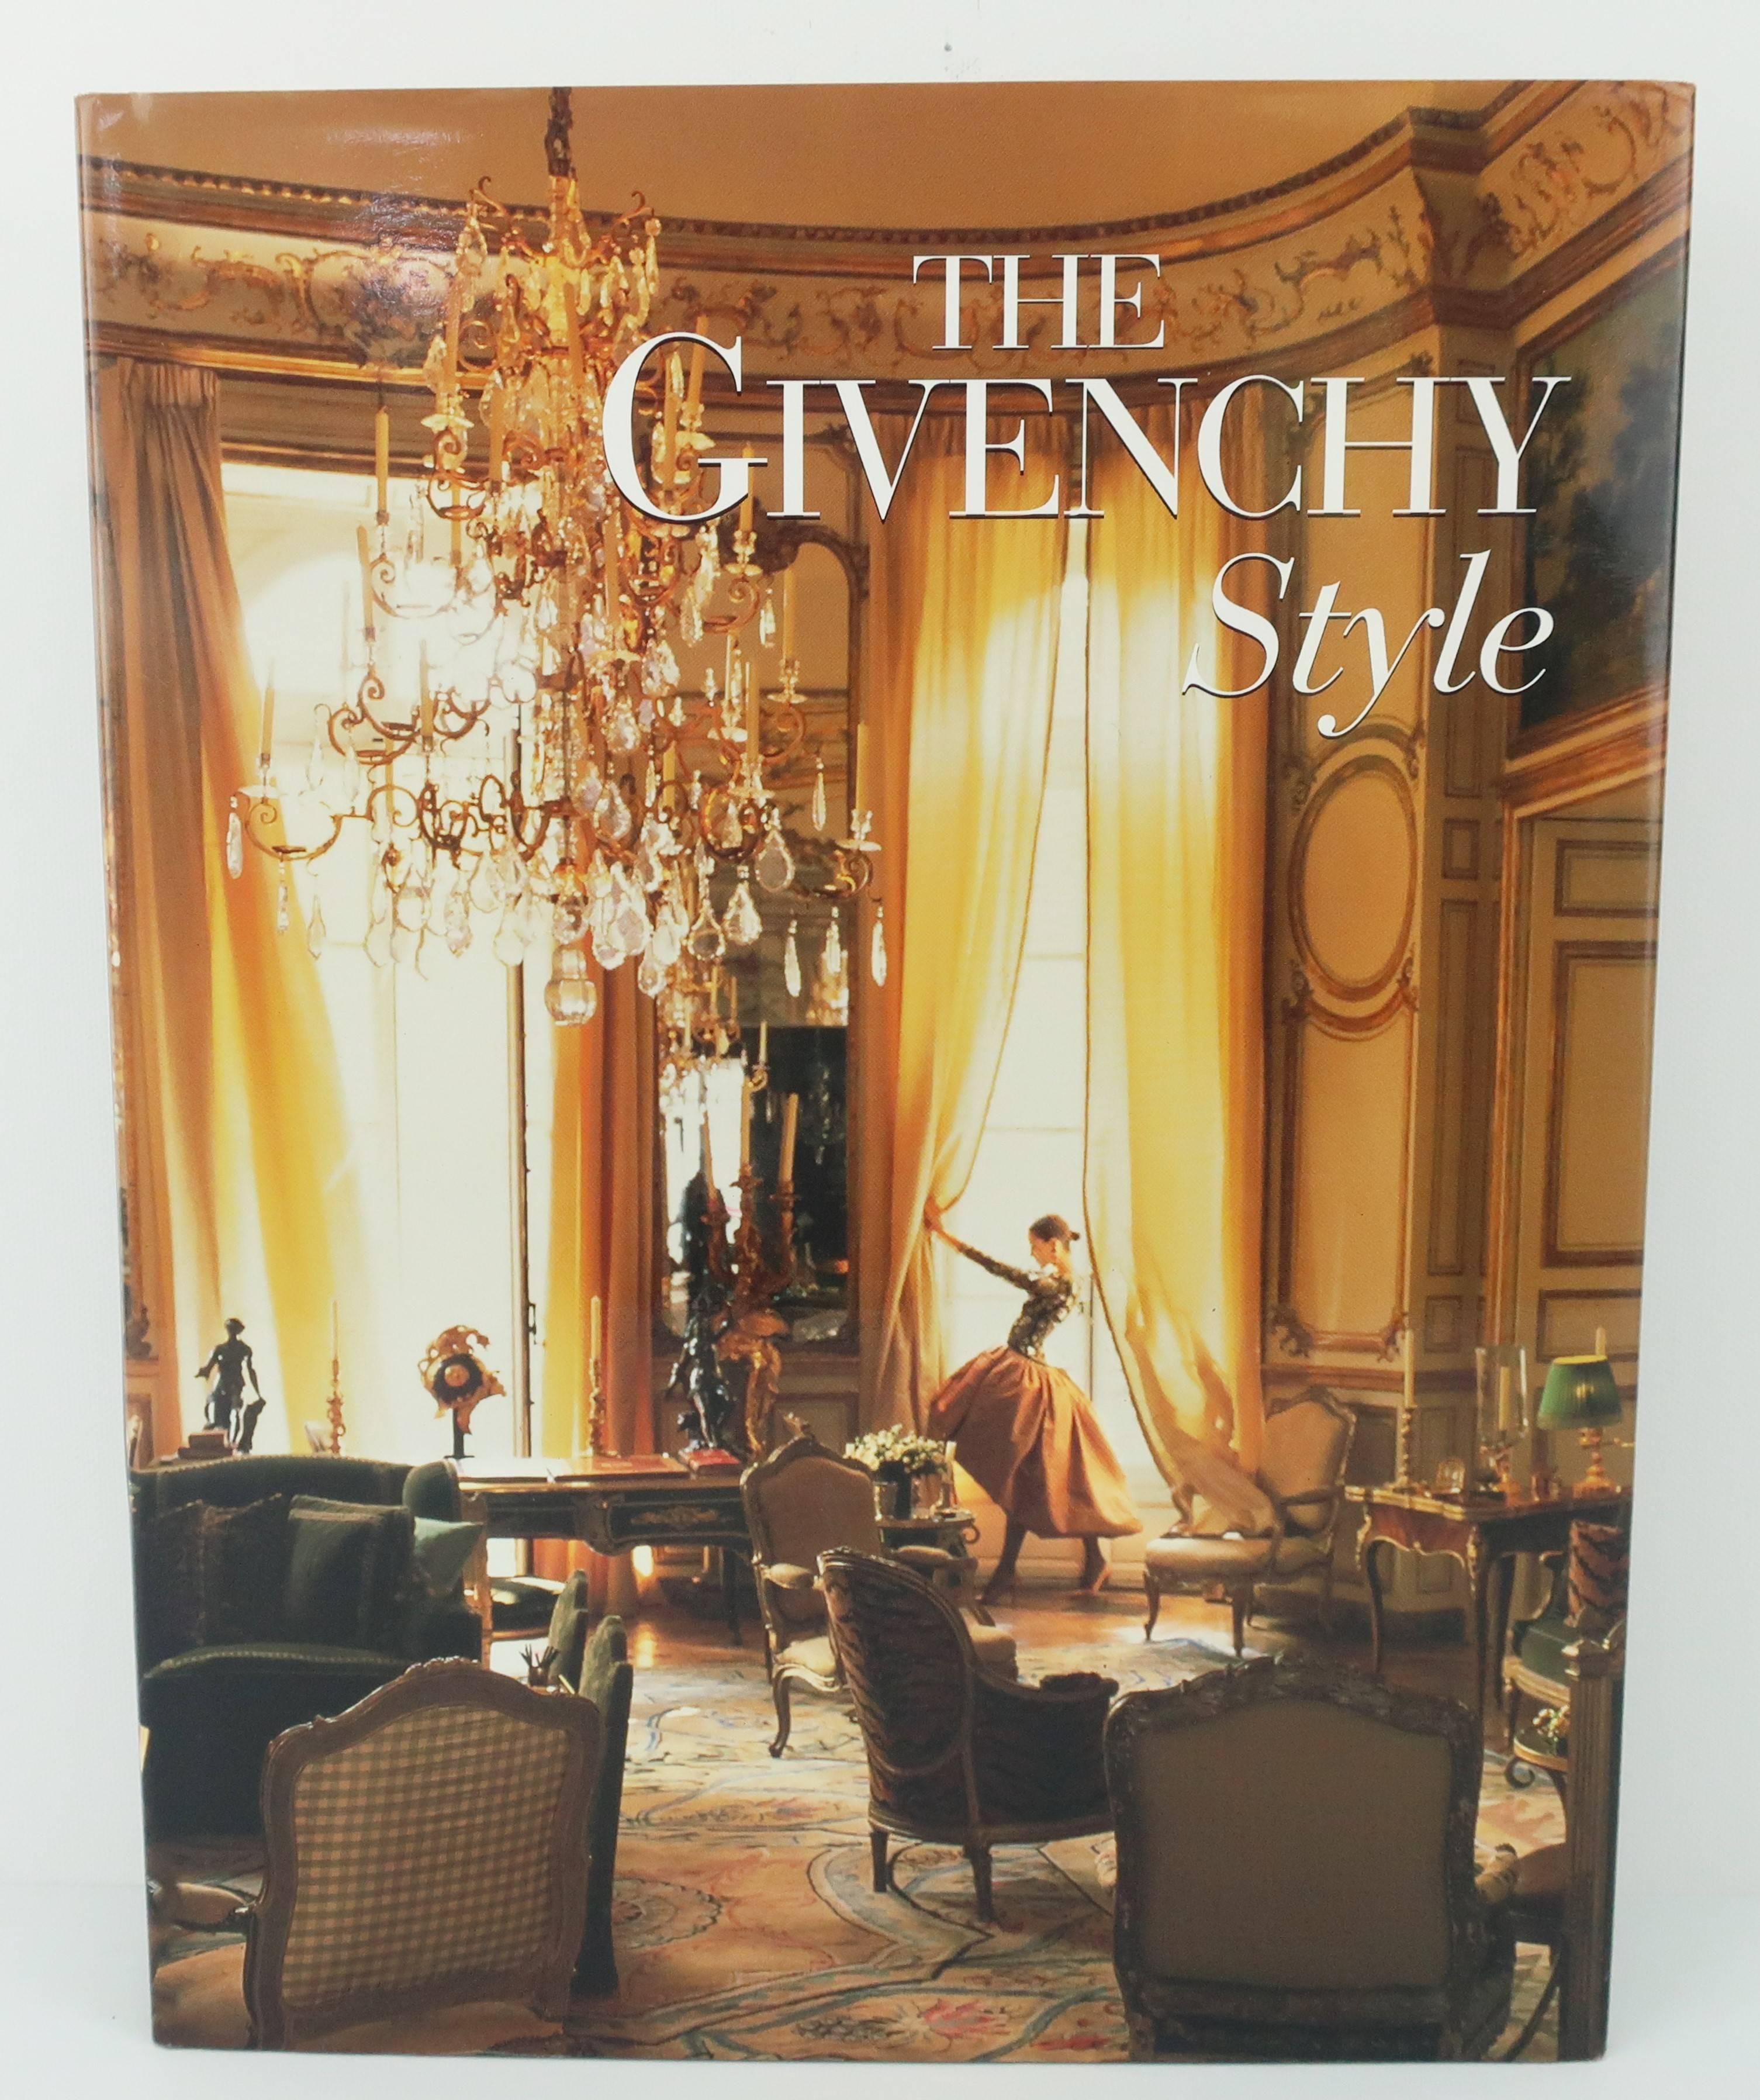 Enter the fabulously fashionable world of Hubert de Givenchy with this beautifully published 208 page hardcover coffee table book printed by Vendome Press in 1998.  Every page is filled with images and fascinating information about the life and